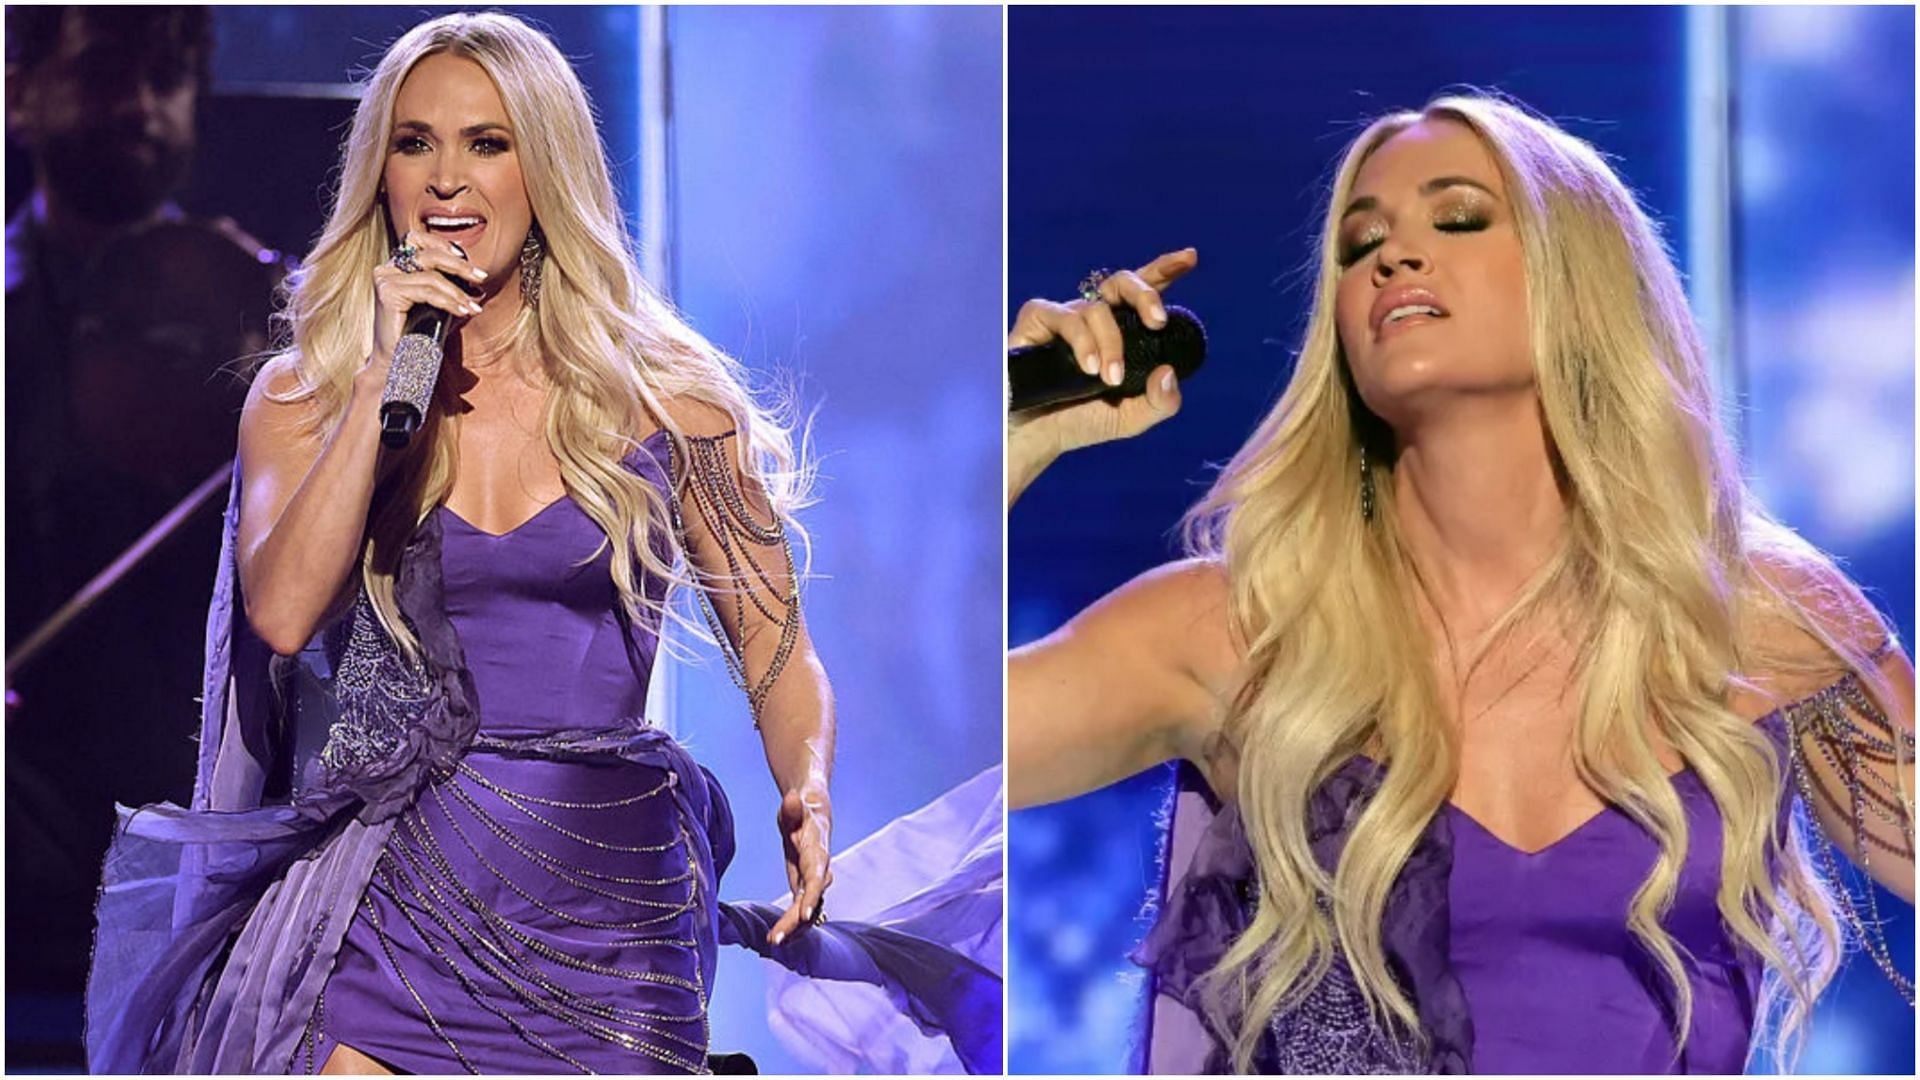 Carrie Underwood has announced her residency scheduled for 2023. (Images via Getty)